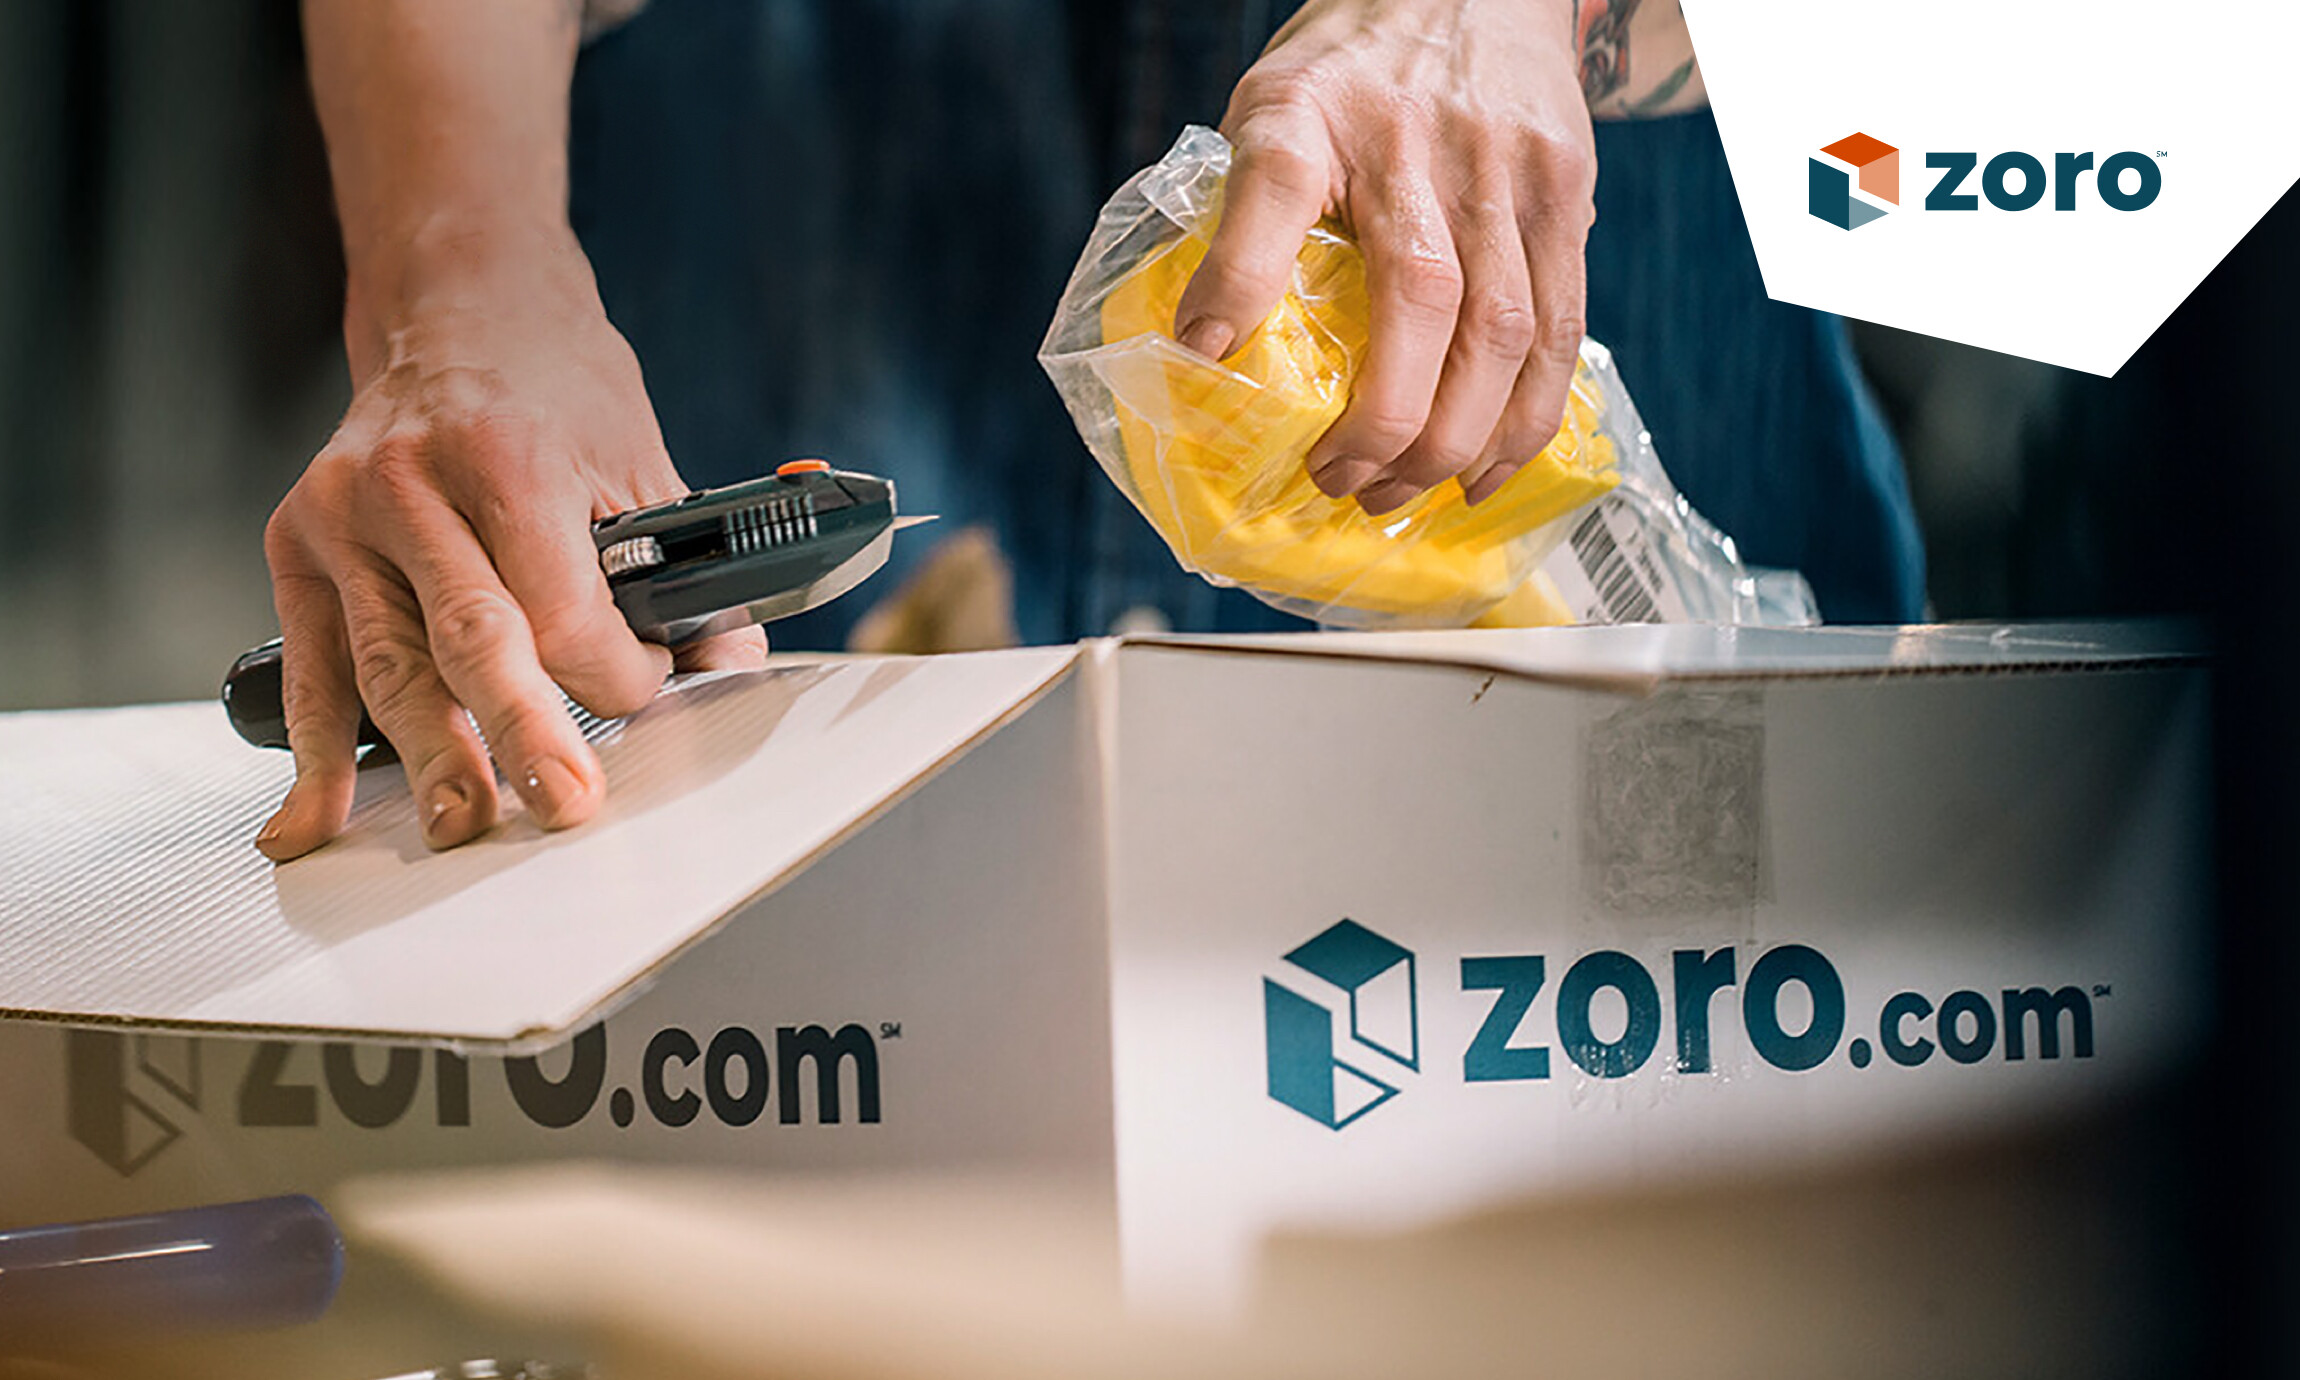 How Zoro.com’s big MACH™ vision is empowering the brand and its SMB customers